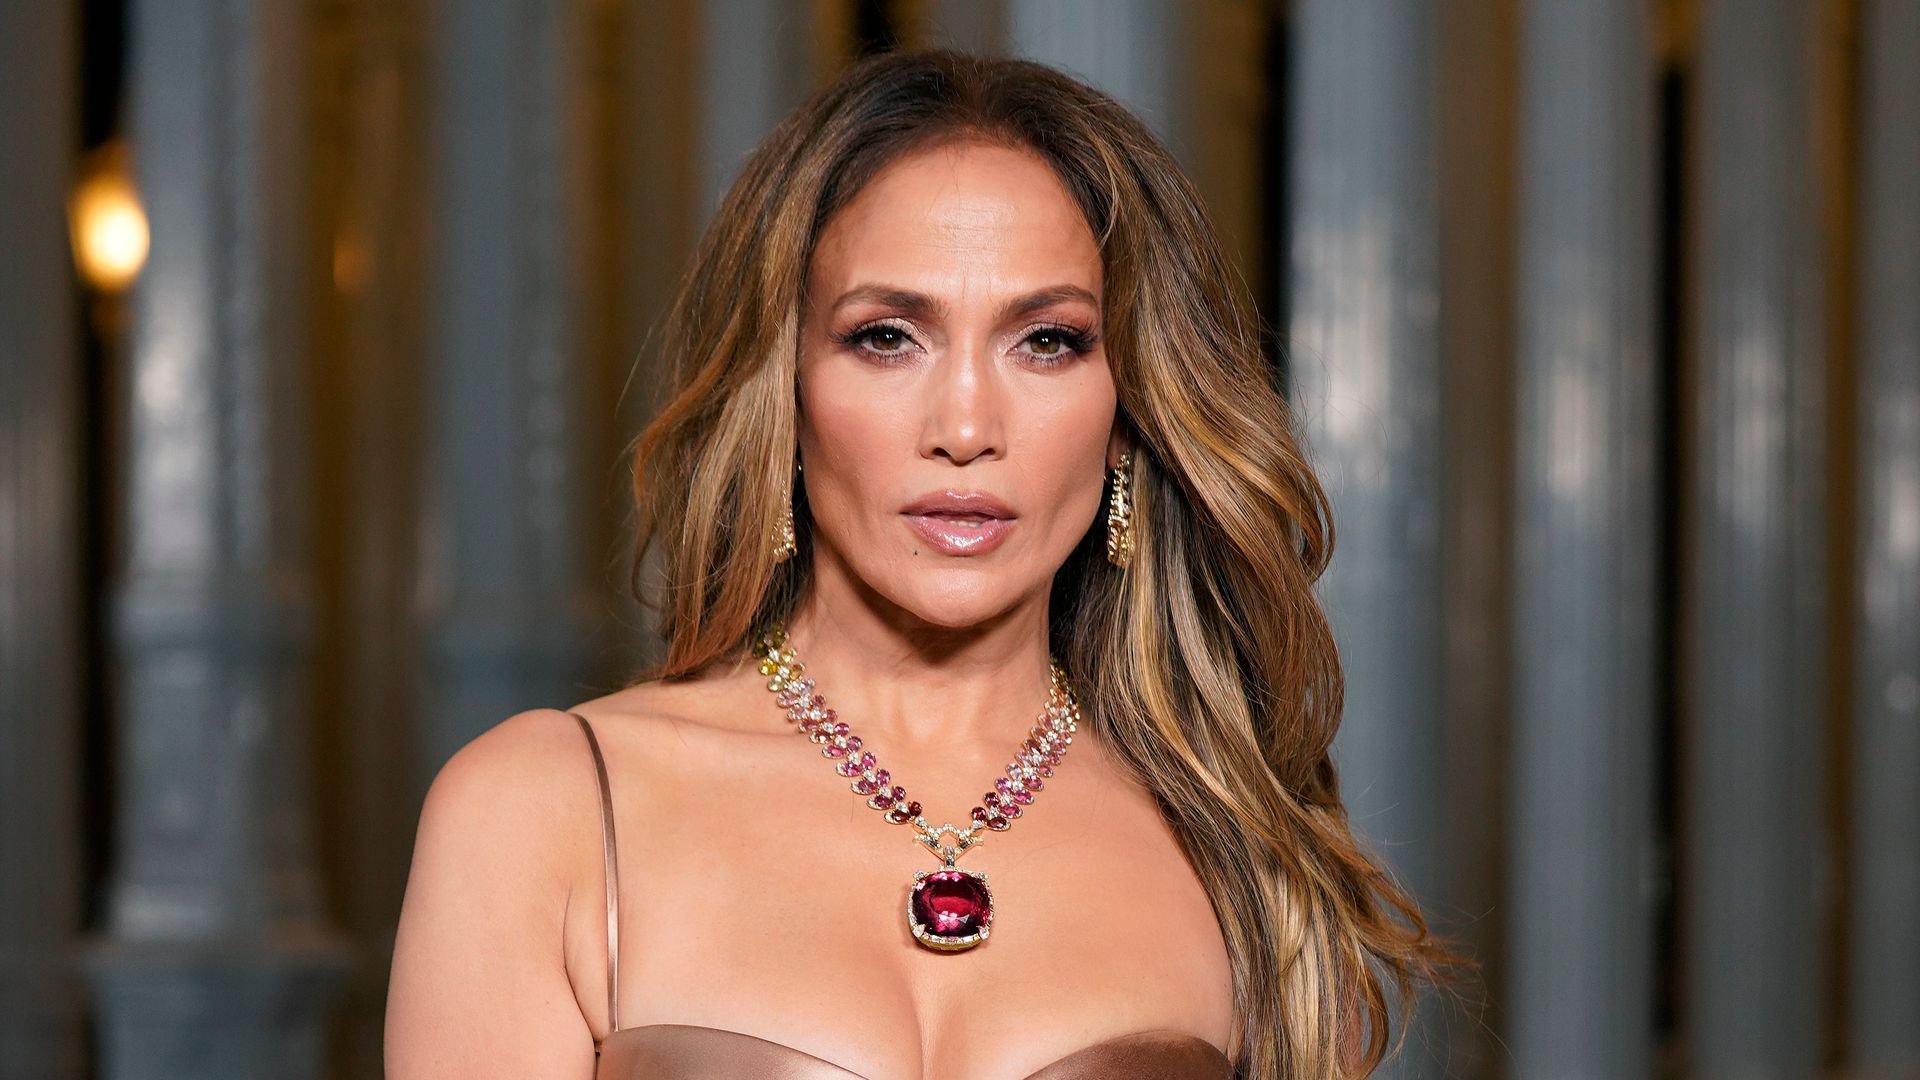 Jennifer Lopez's heart is full: Singer shares photos of who makes her happy